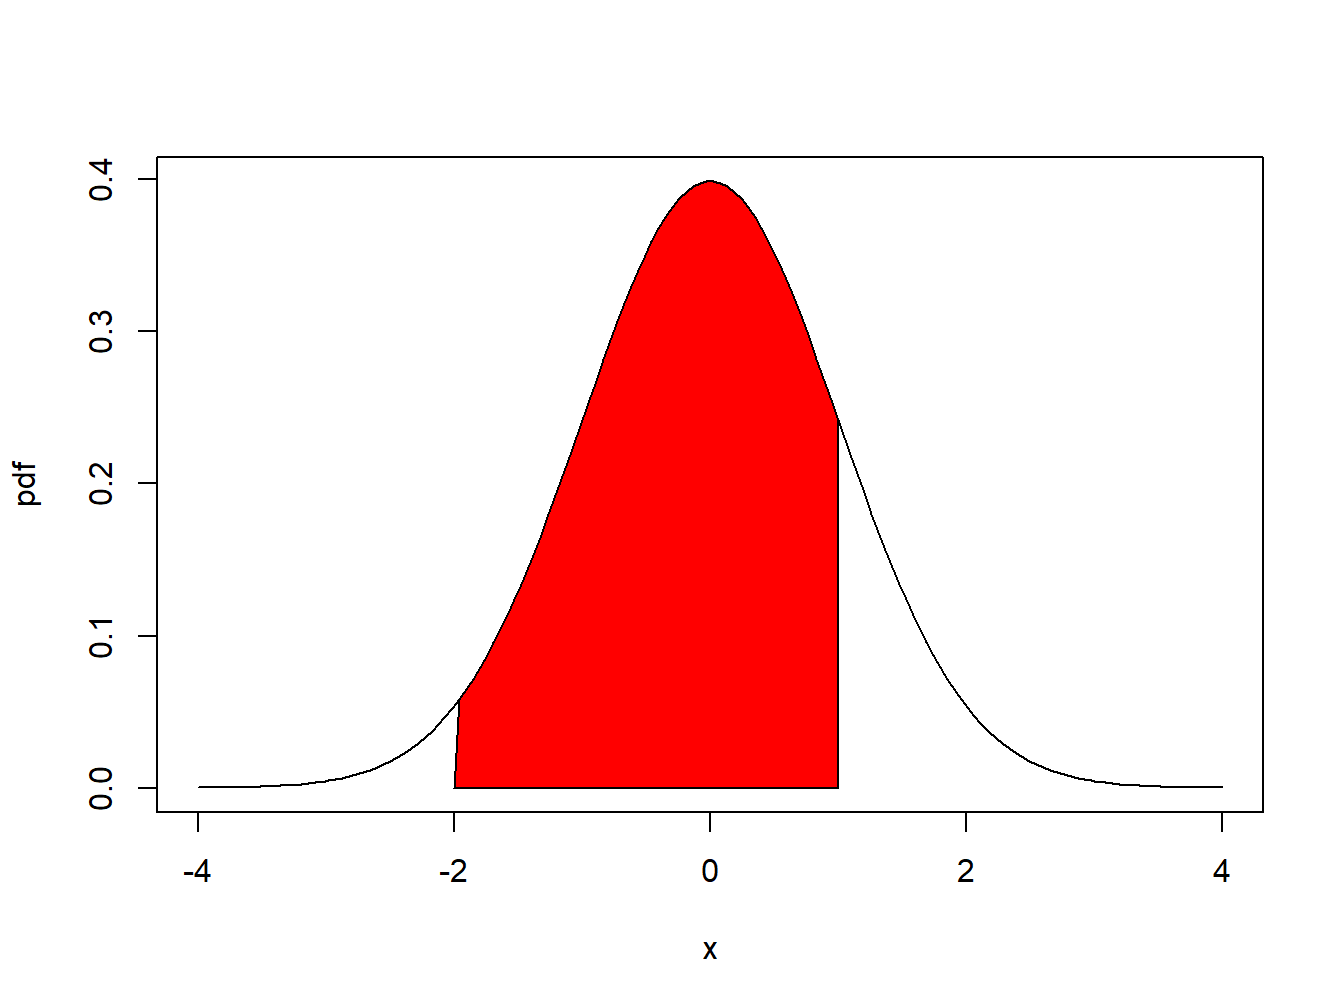 $Pr(-2 \leq X \leq 1)$ is represented by the area under the probability curve.